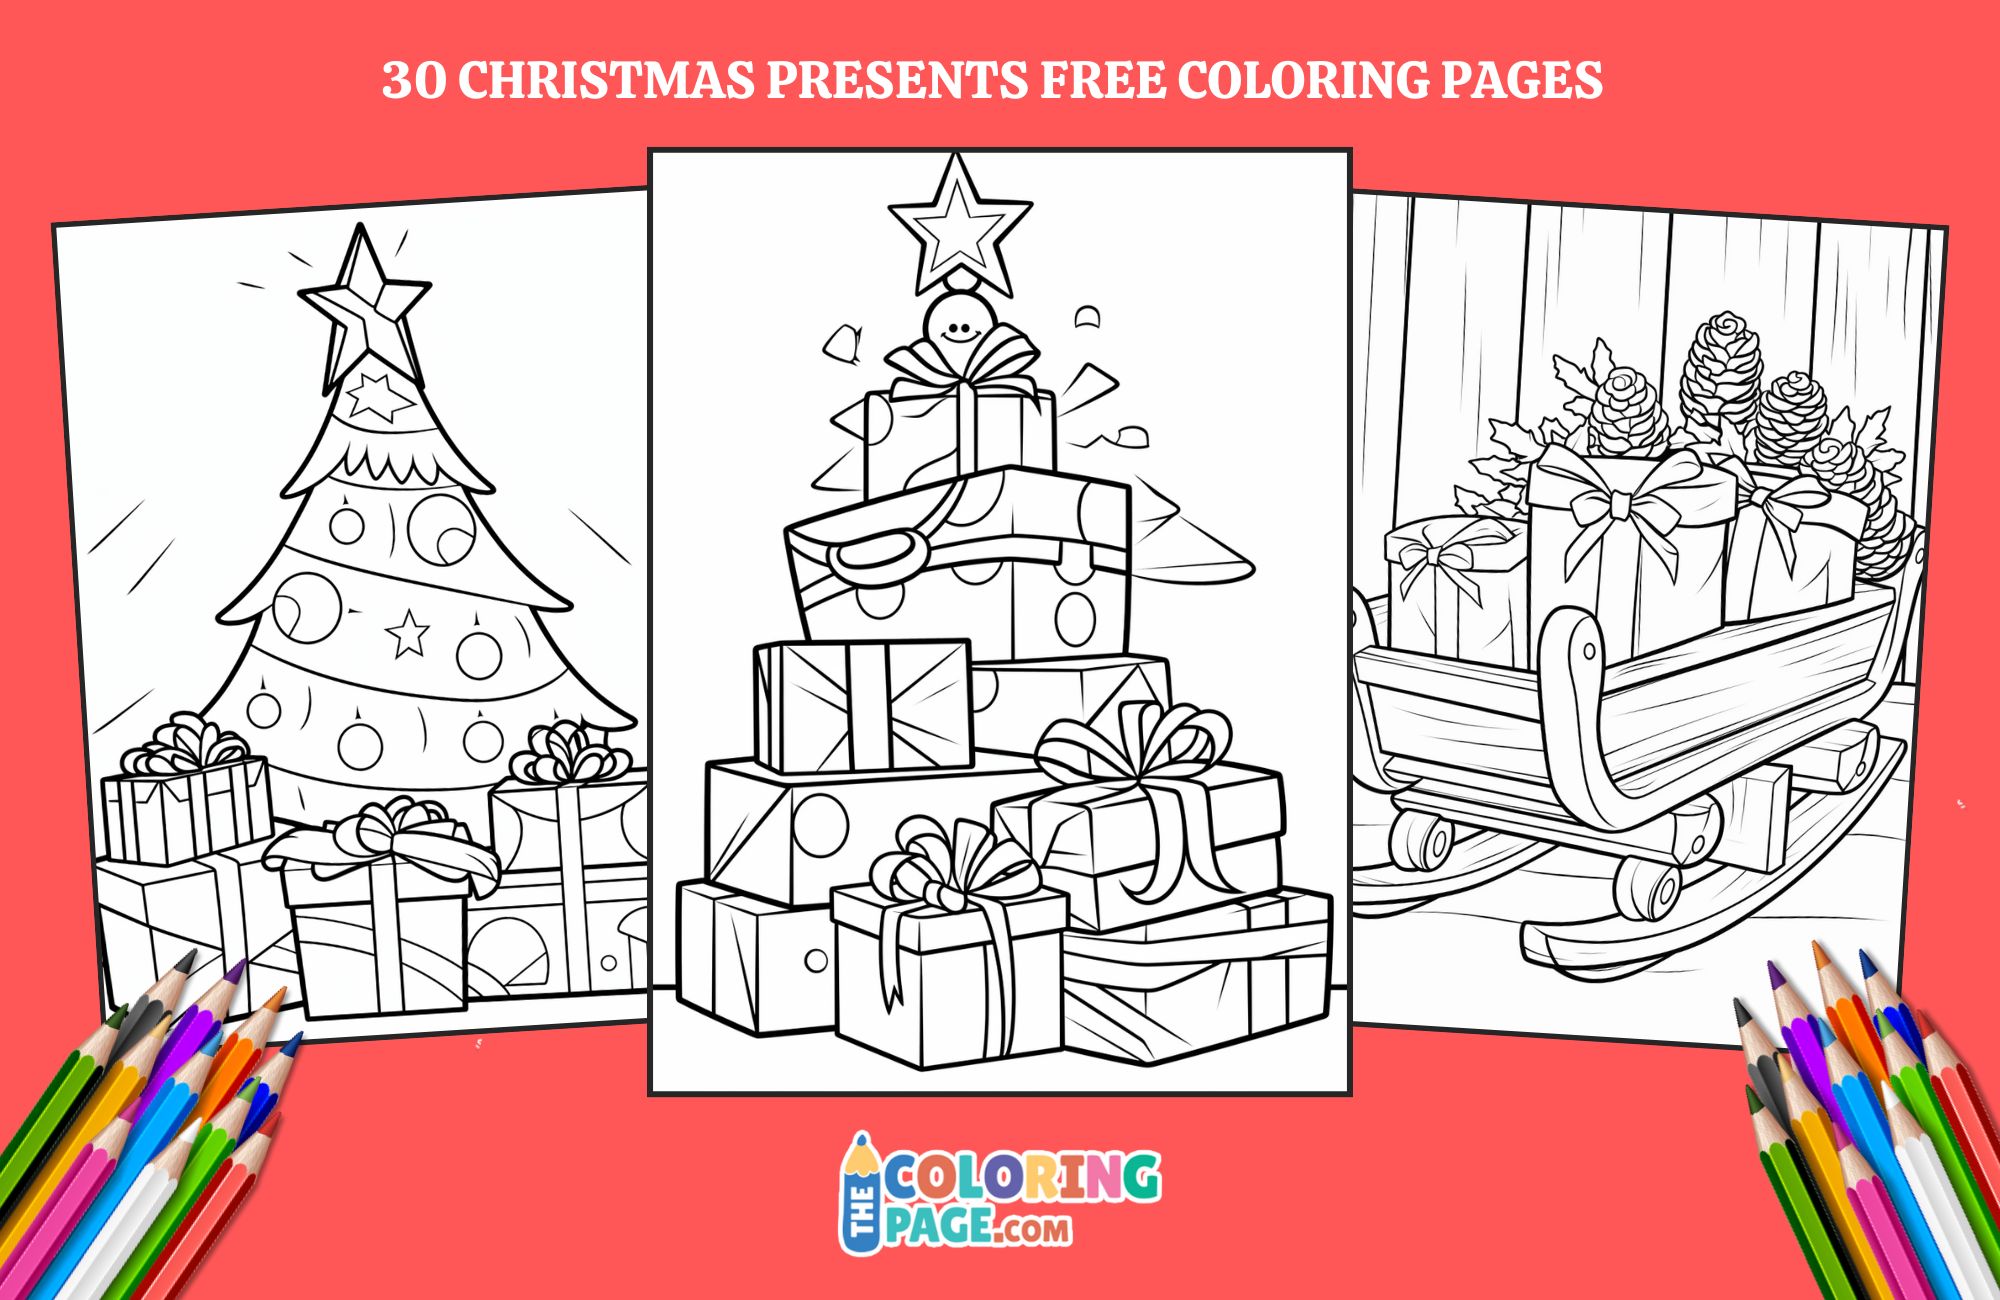 30 Free Christmas Presents Coloring Pages for kids